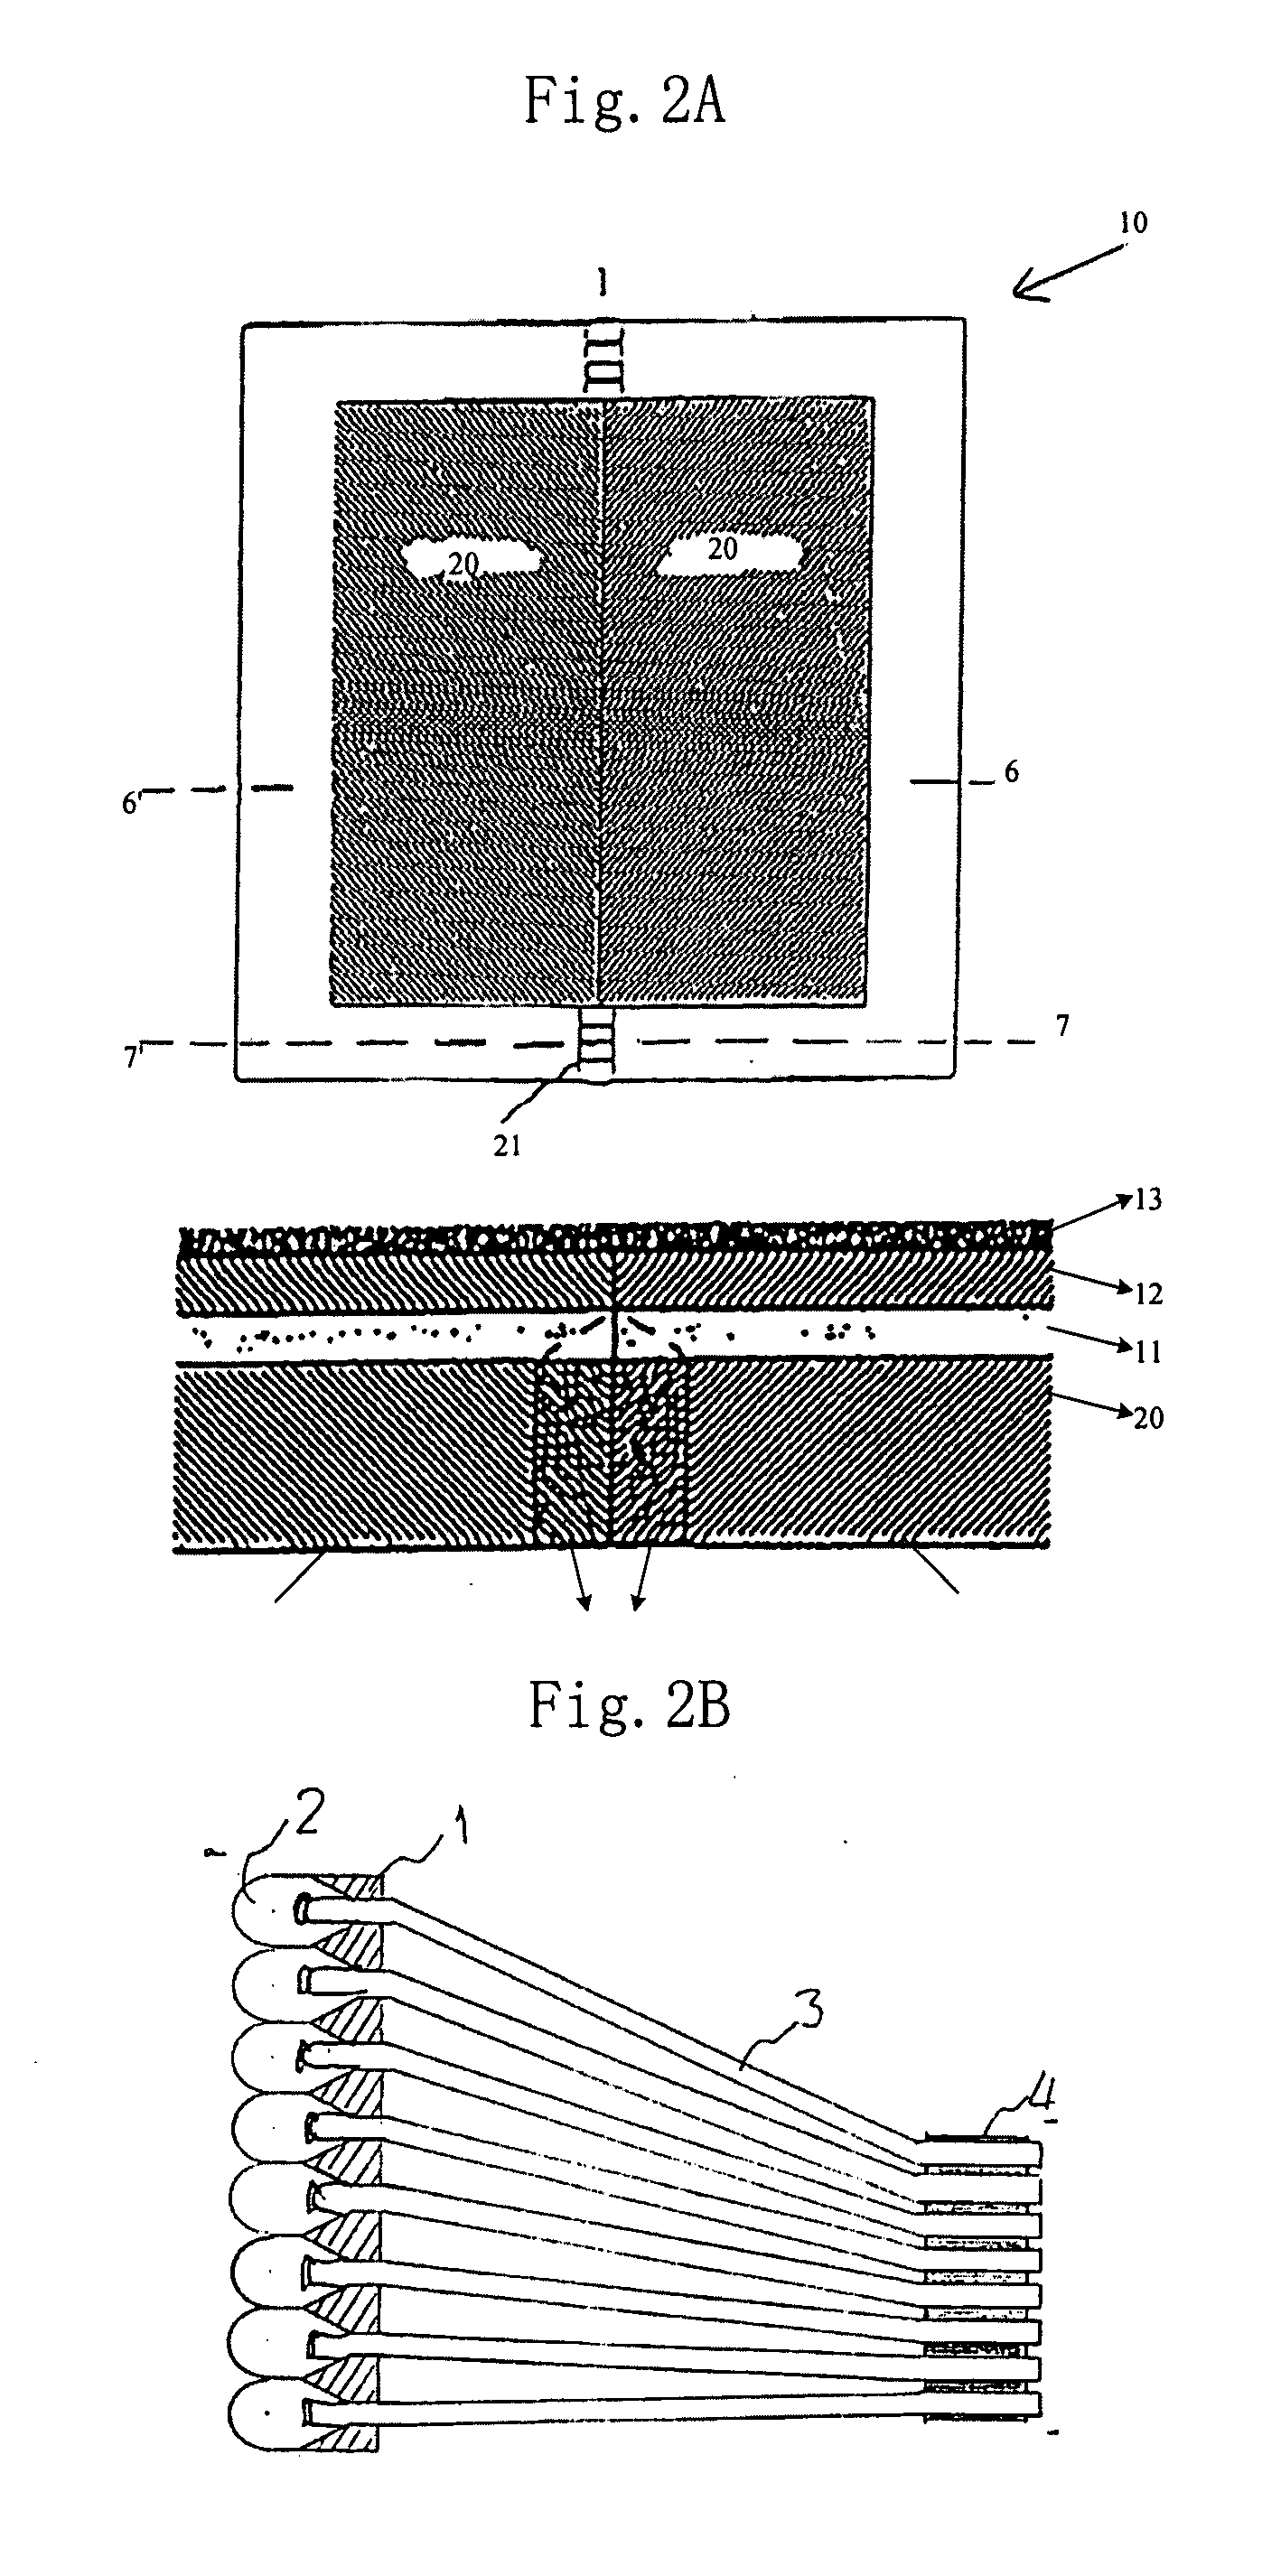 Method and Apparatus for Eliminating Seam Between Adjoined Screens